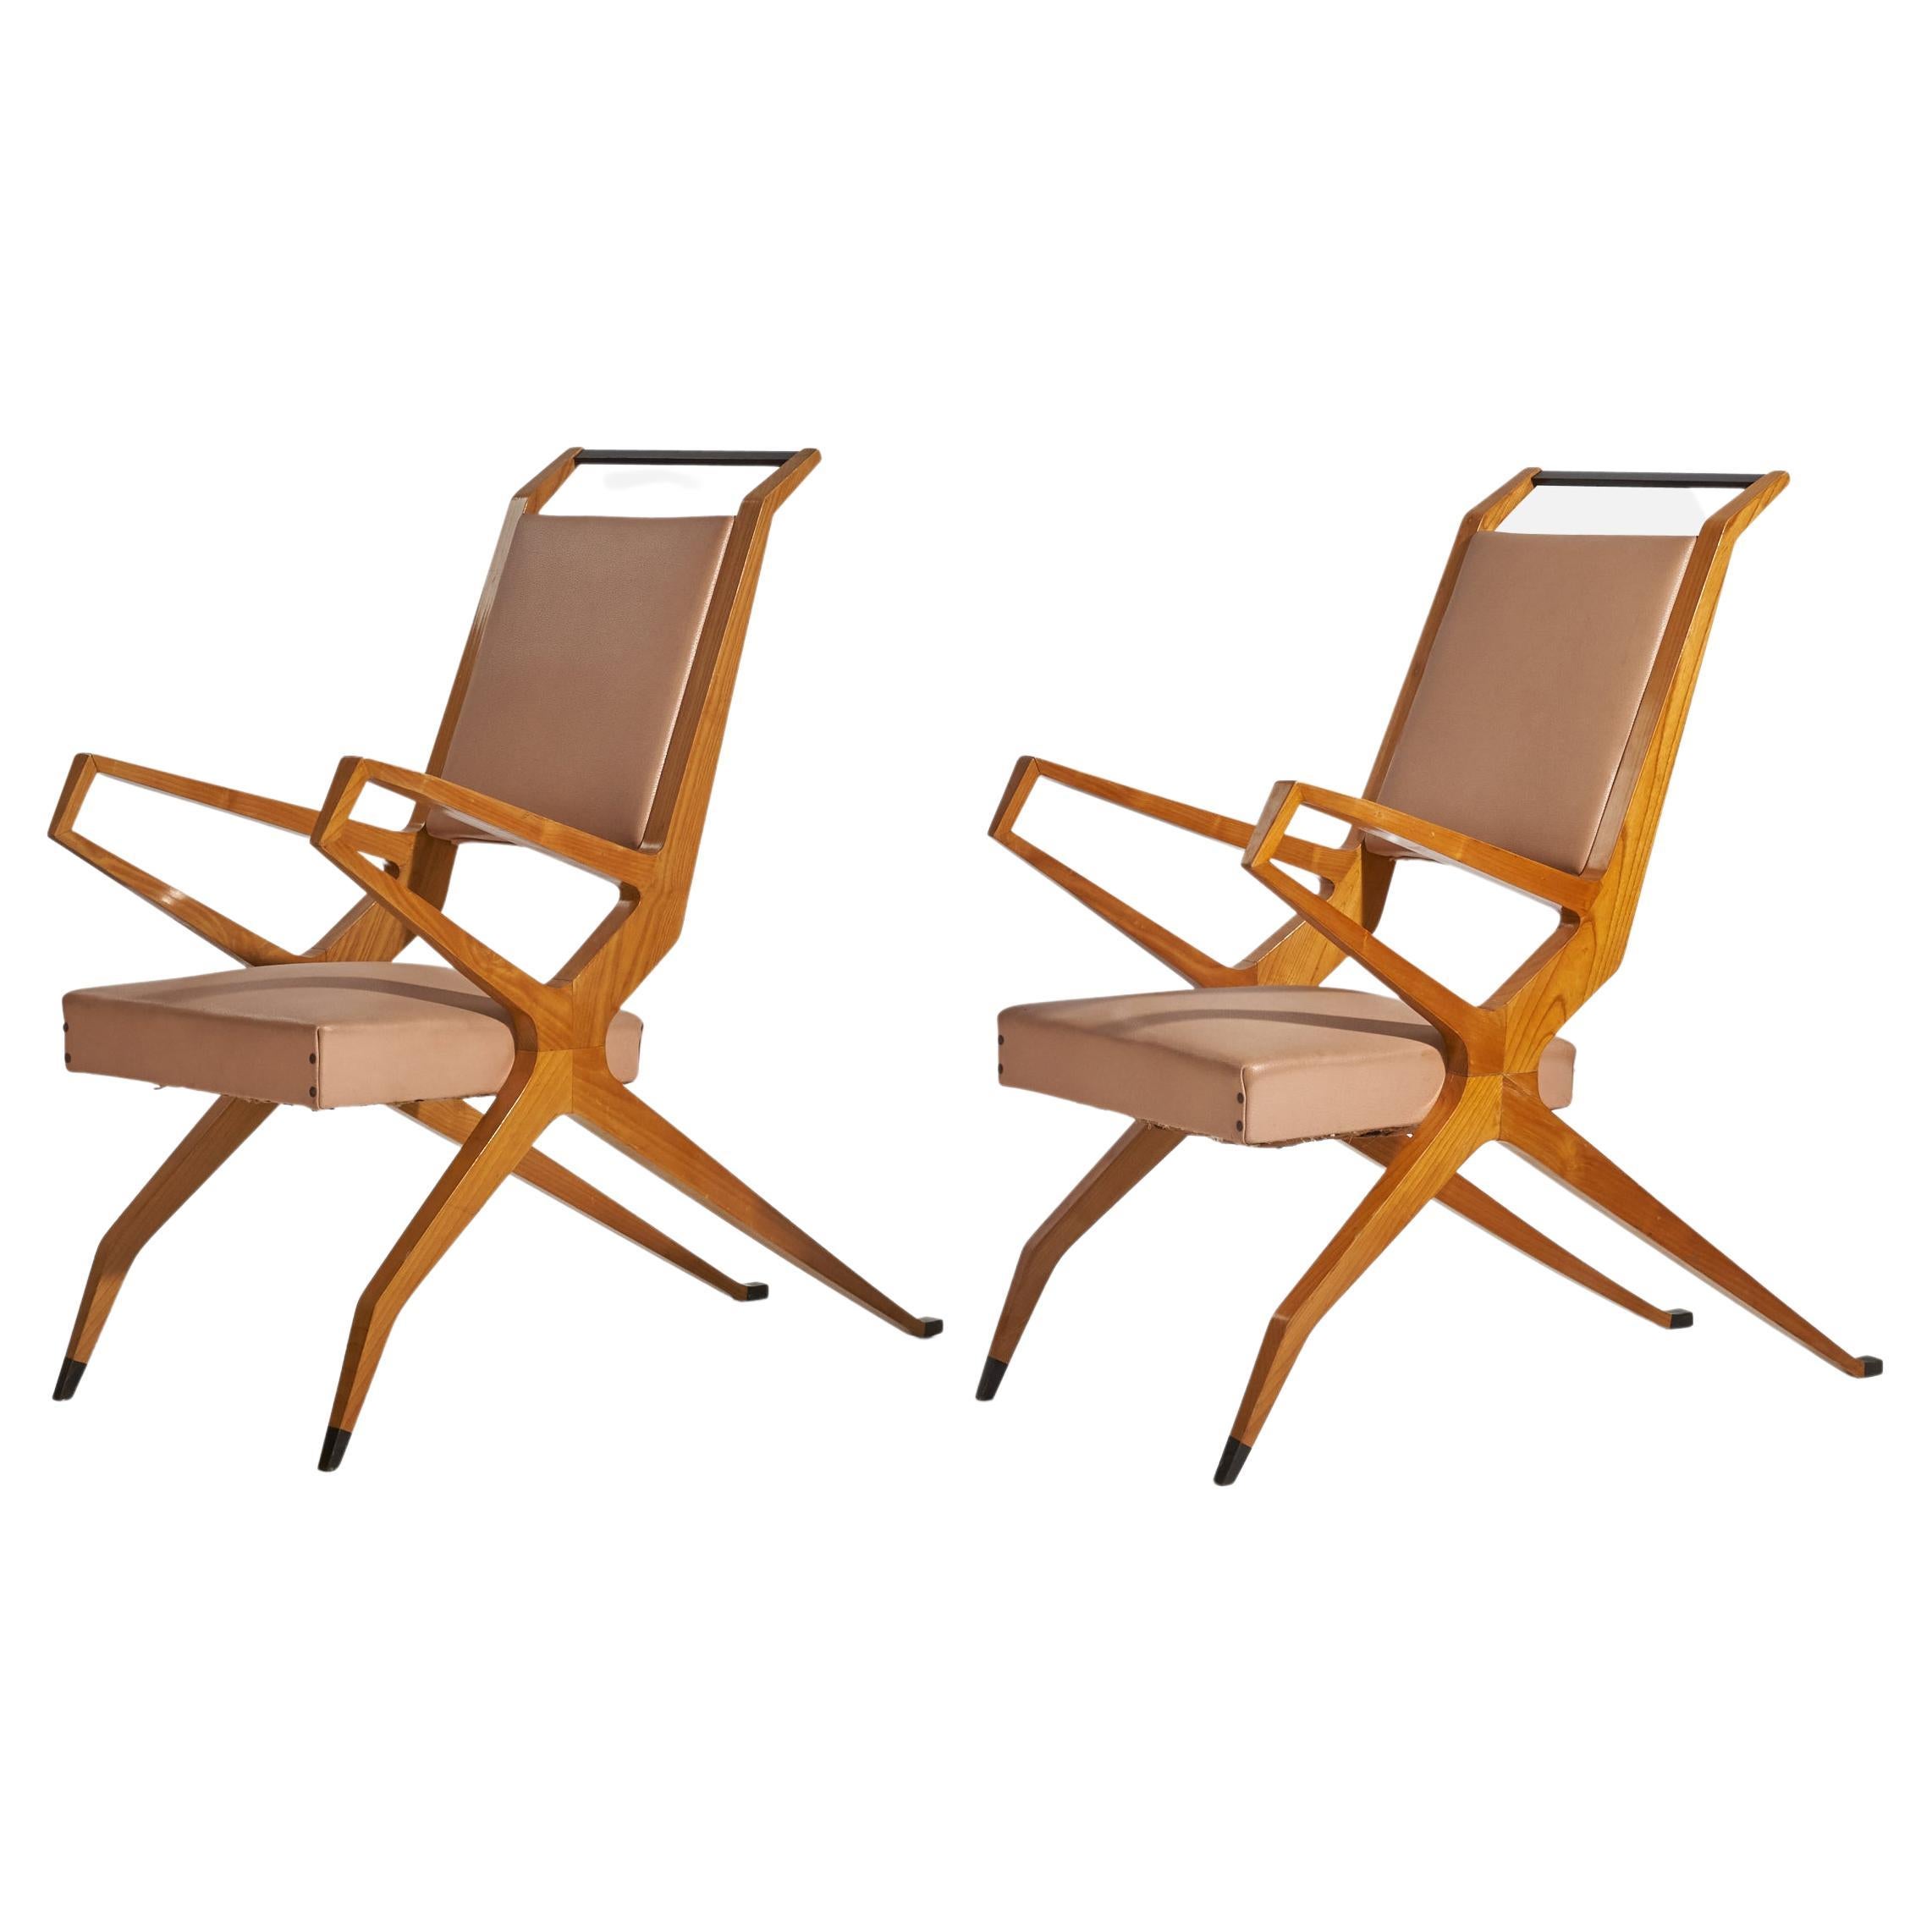 Campo & Graffi Attribution, Lounge Chairs, Ash, Wood, Vinyl, Brass, C. 1955 For Sale